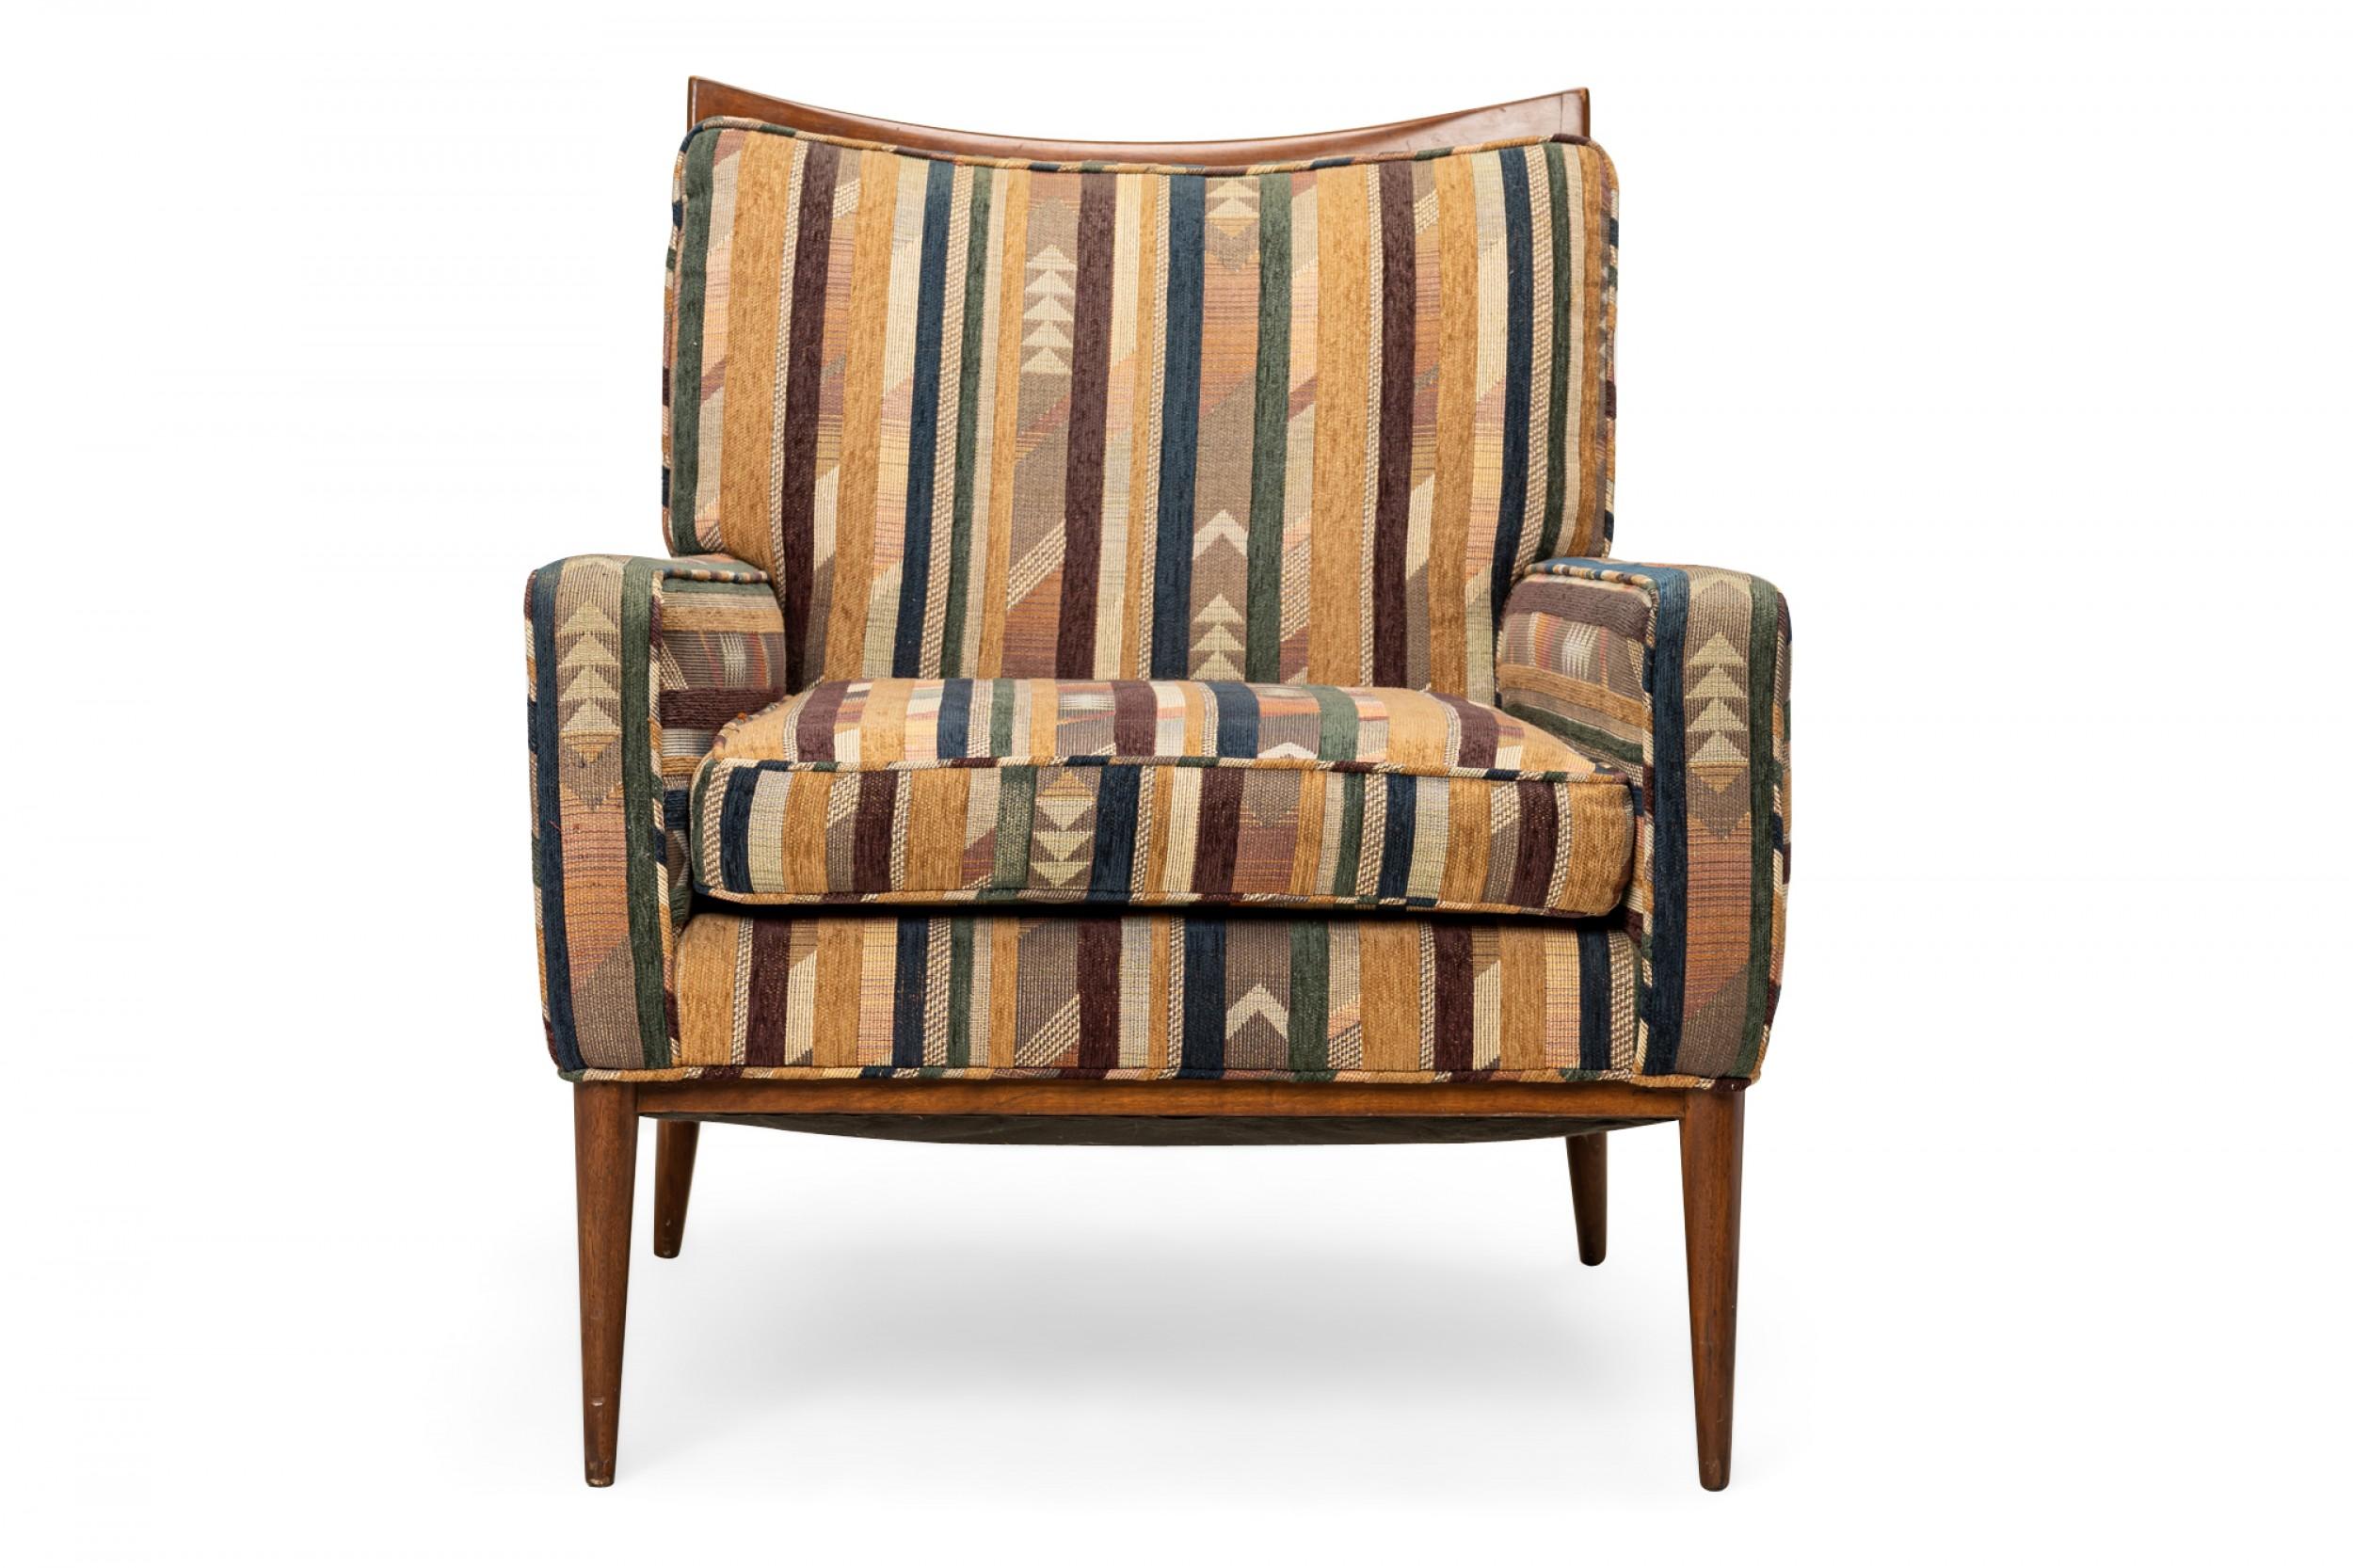 American Mid-Century lounge / armchair with a walnut frame with a scooped back rail and multi-colored geometric patterned and striped fabric upholstery, resting on four tapered dowel legs. (PAUL MCCOBB FOR DIRECTIONAL).